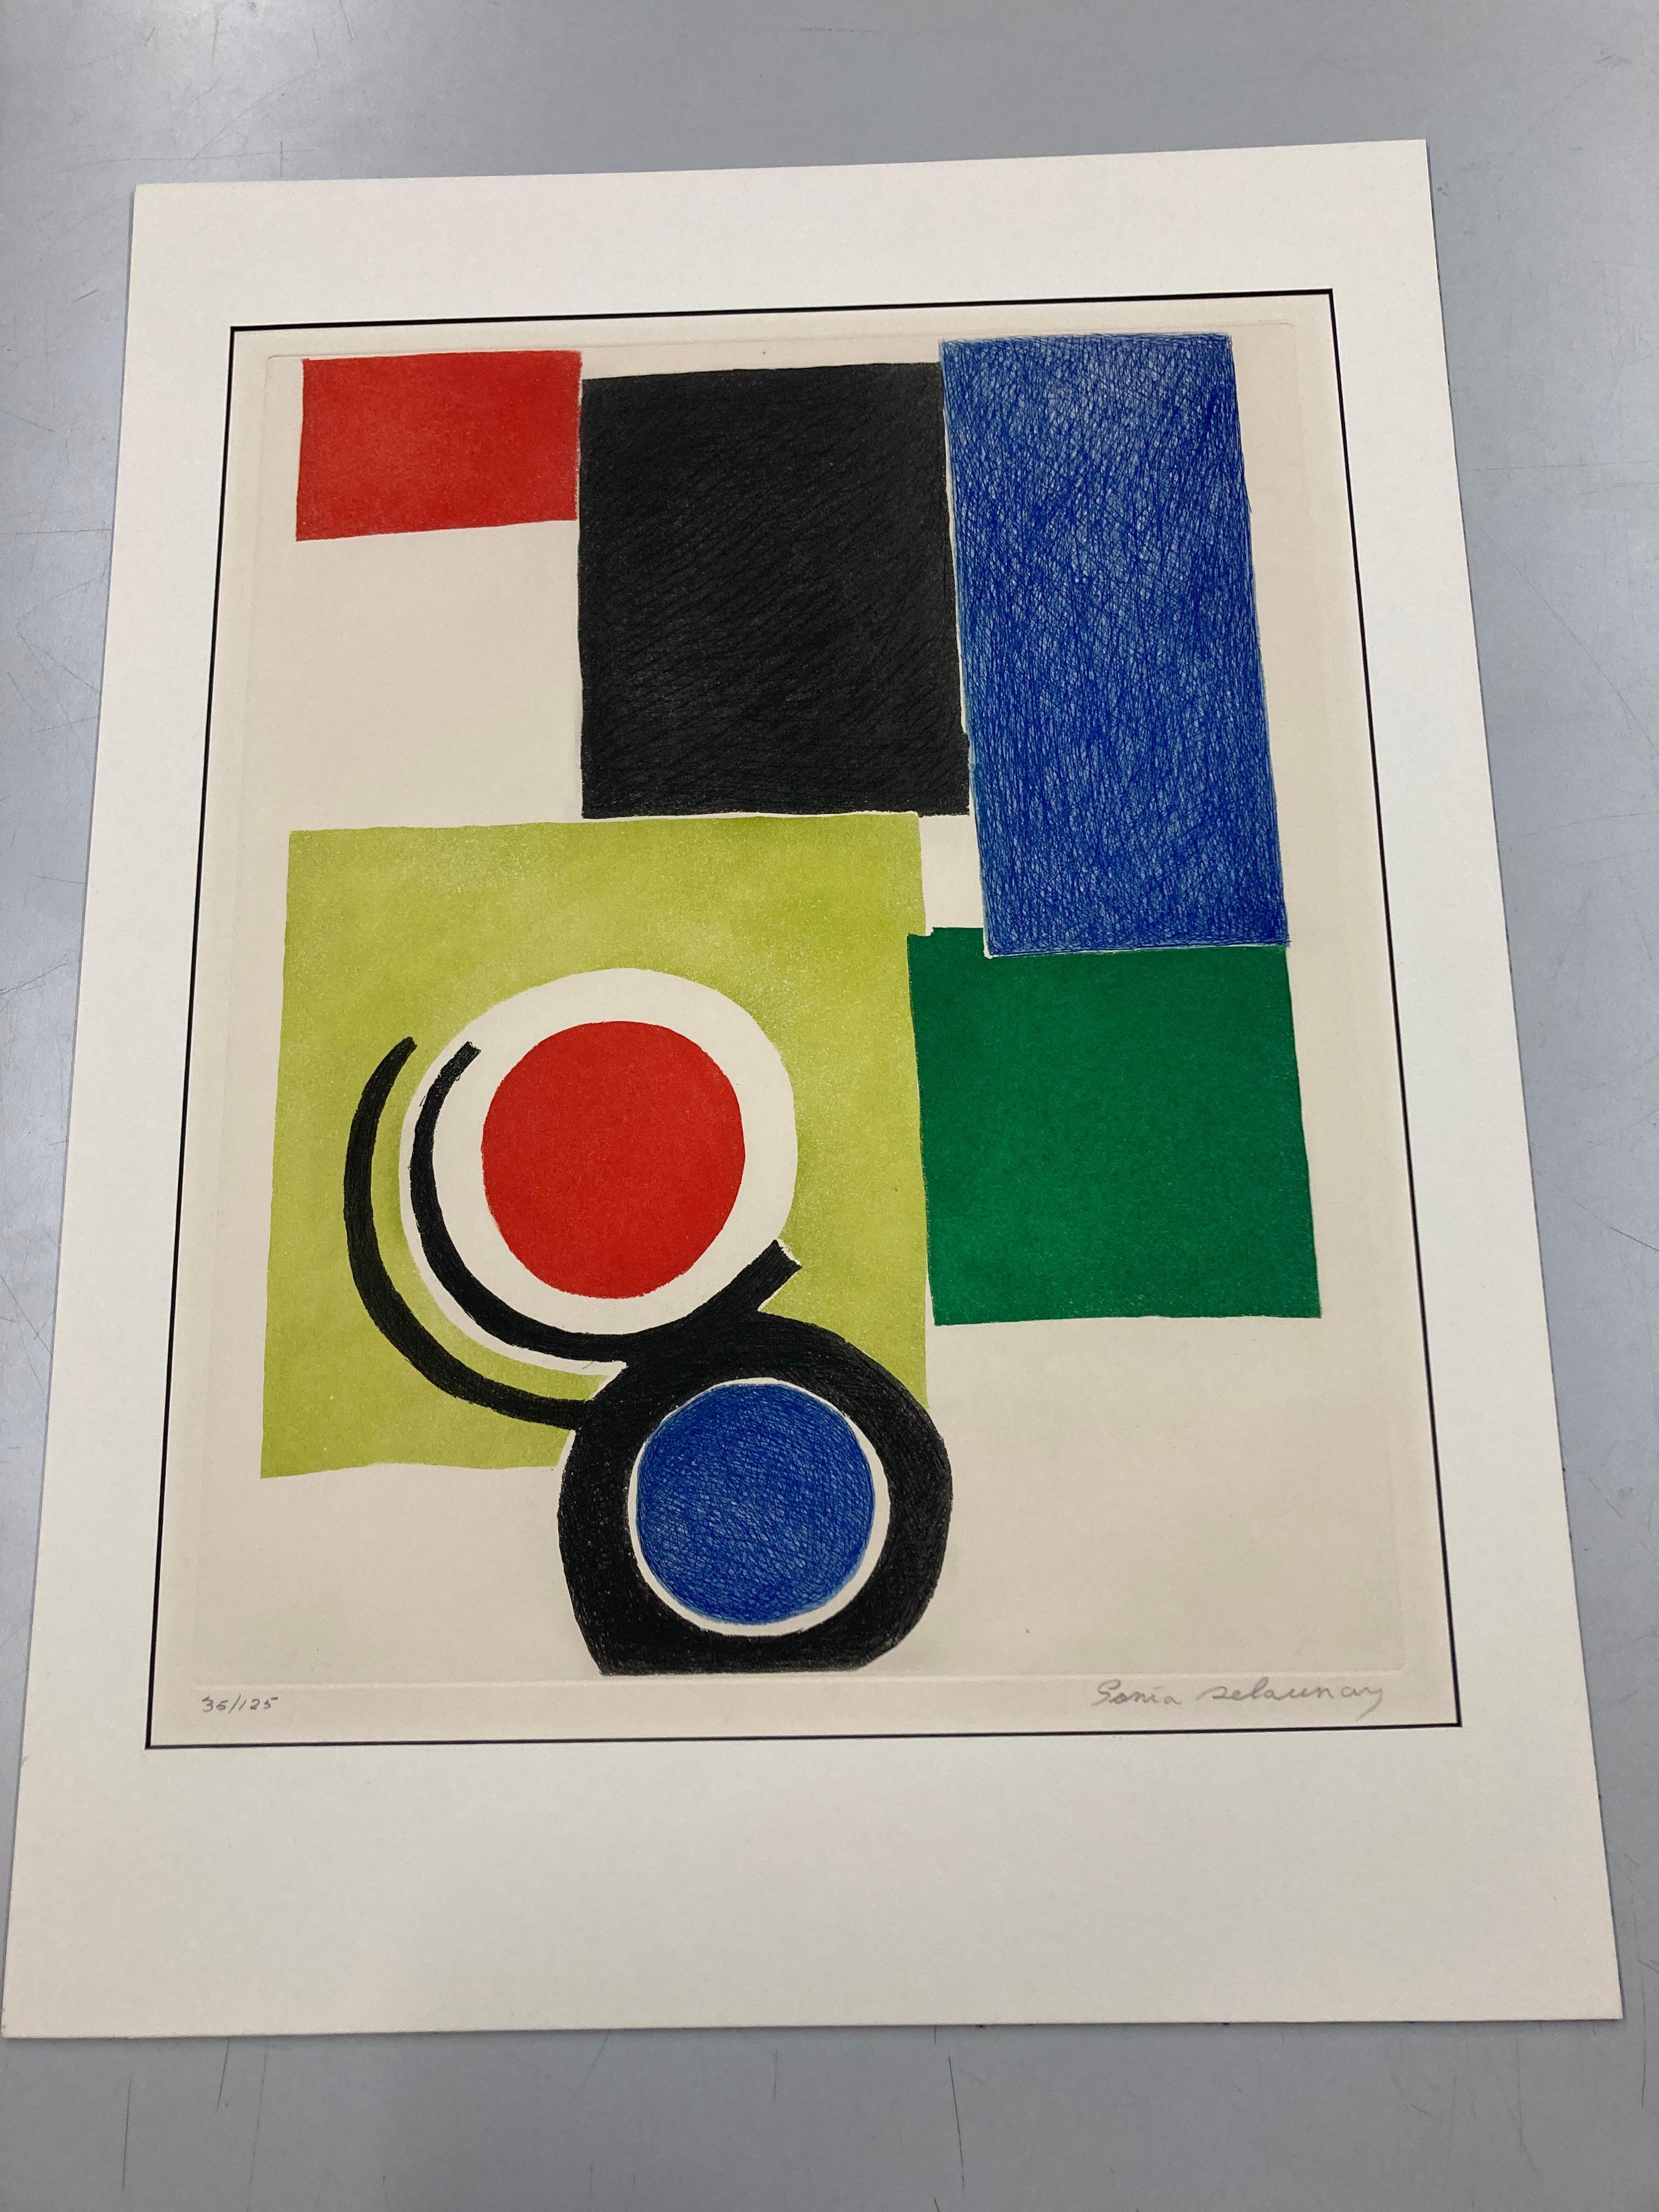 Composition polychrome - Print by Sonia Delaunay